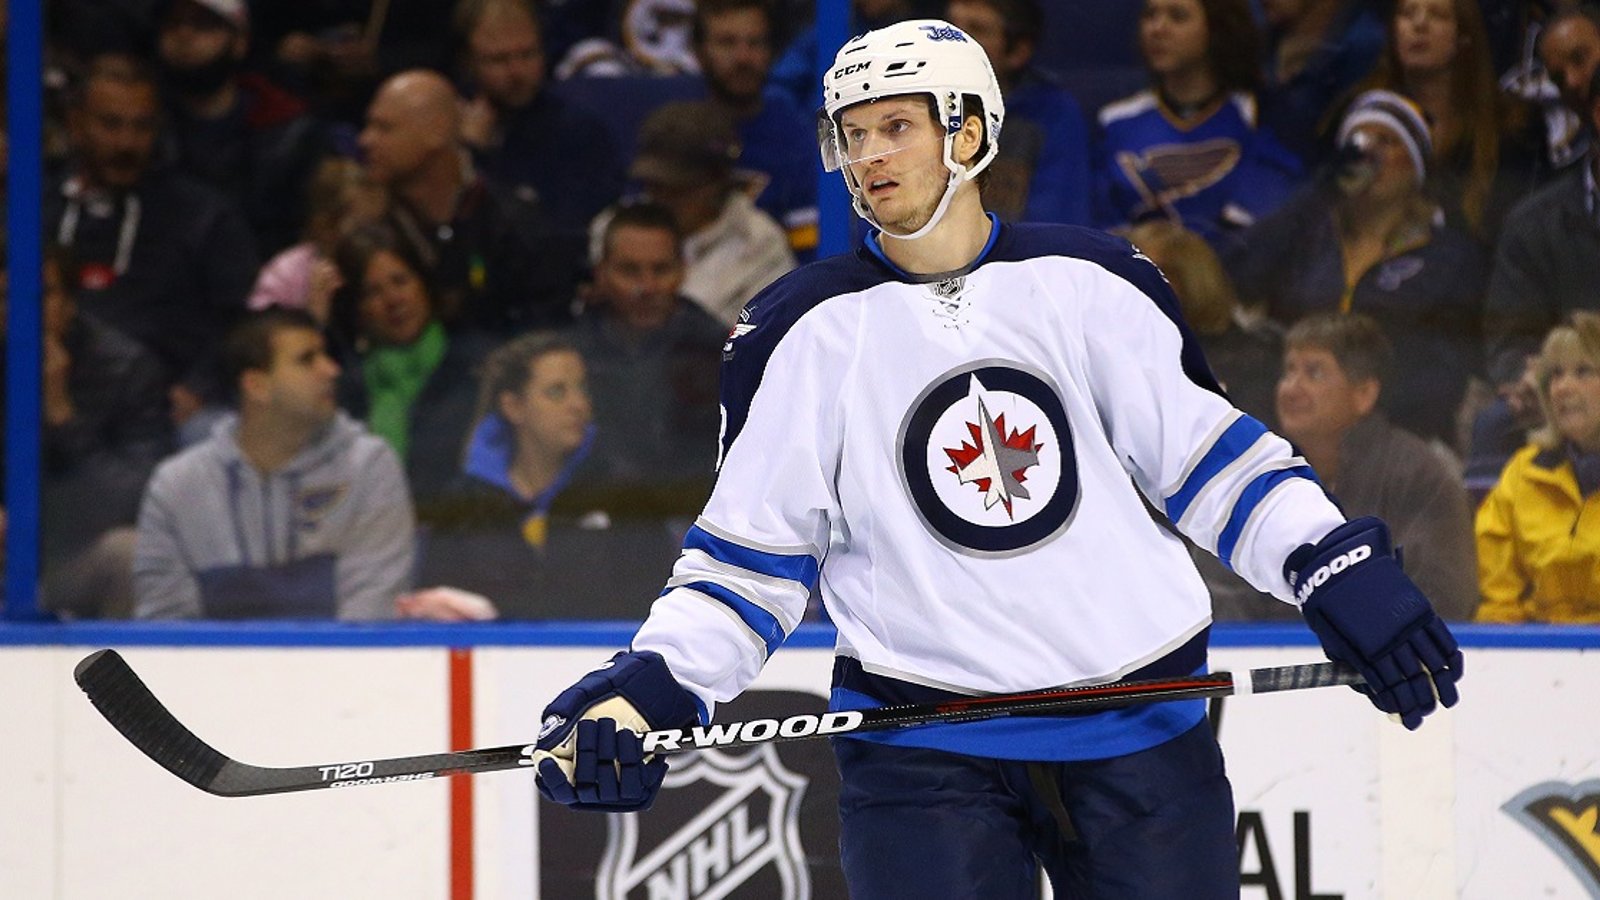 Jets fans hilariously mock Jacob Trouba after his trade demands.